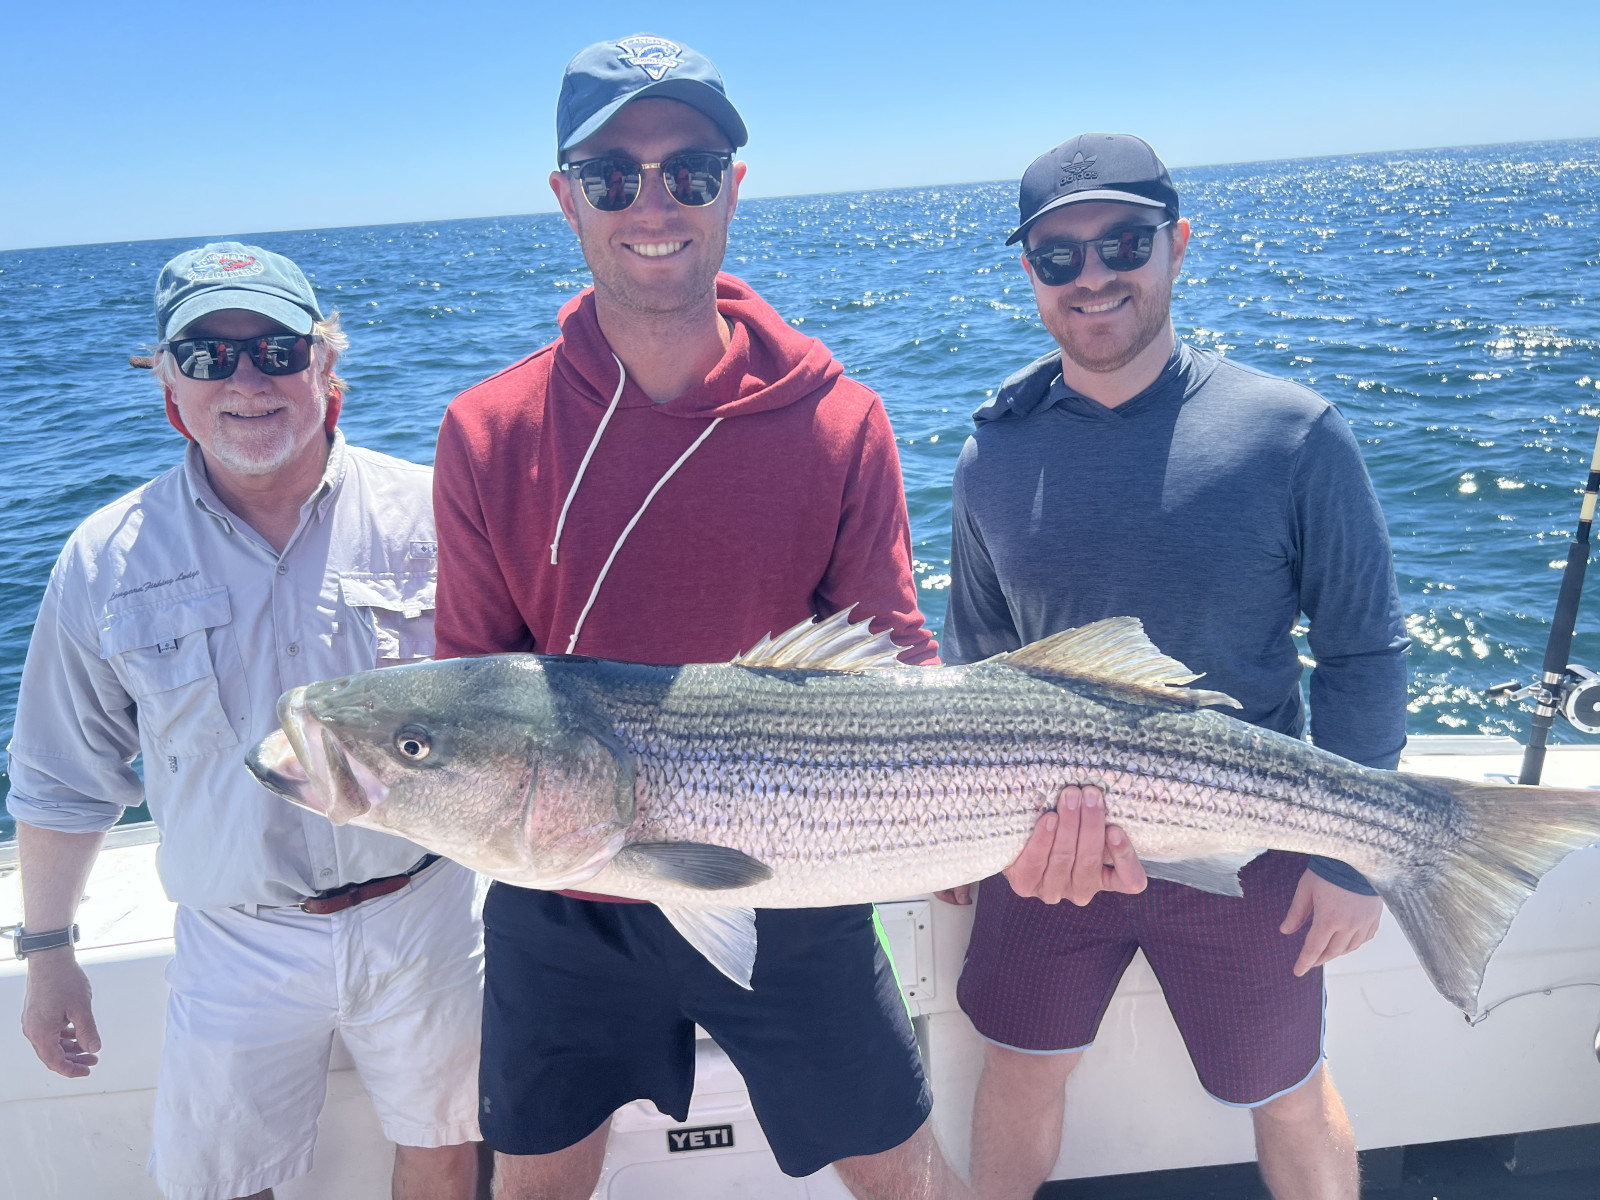 Man holding very very large striped bass, smiling, on deck of the charter fishing boat on a sunny day